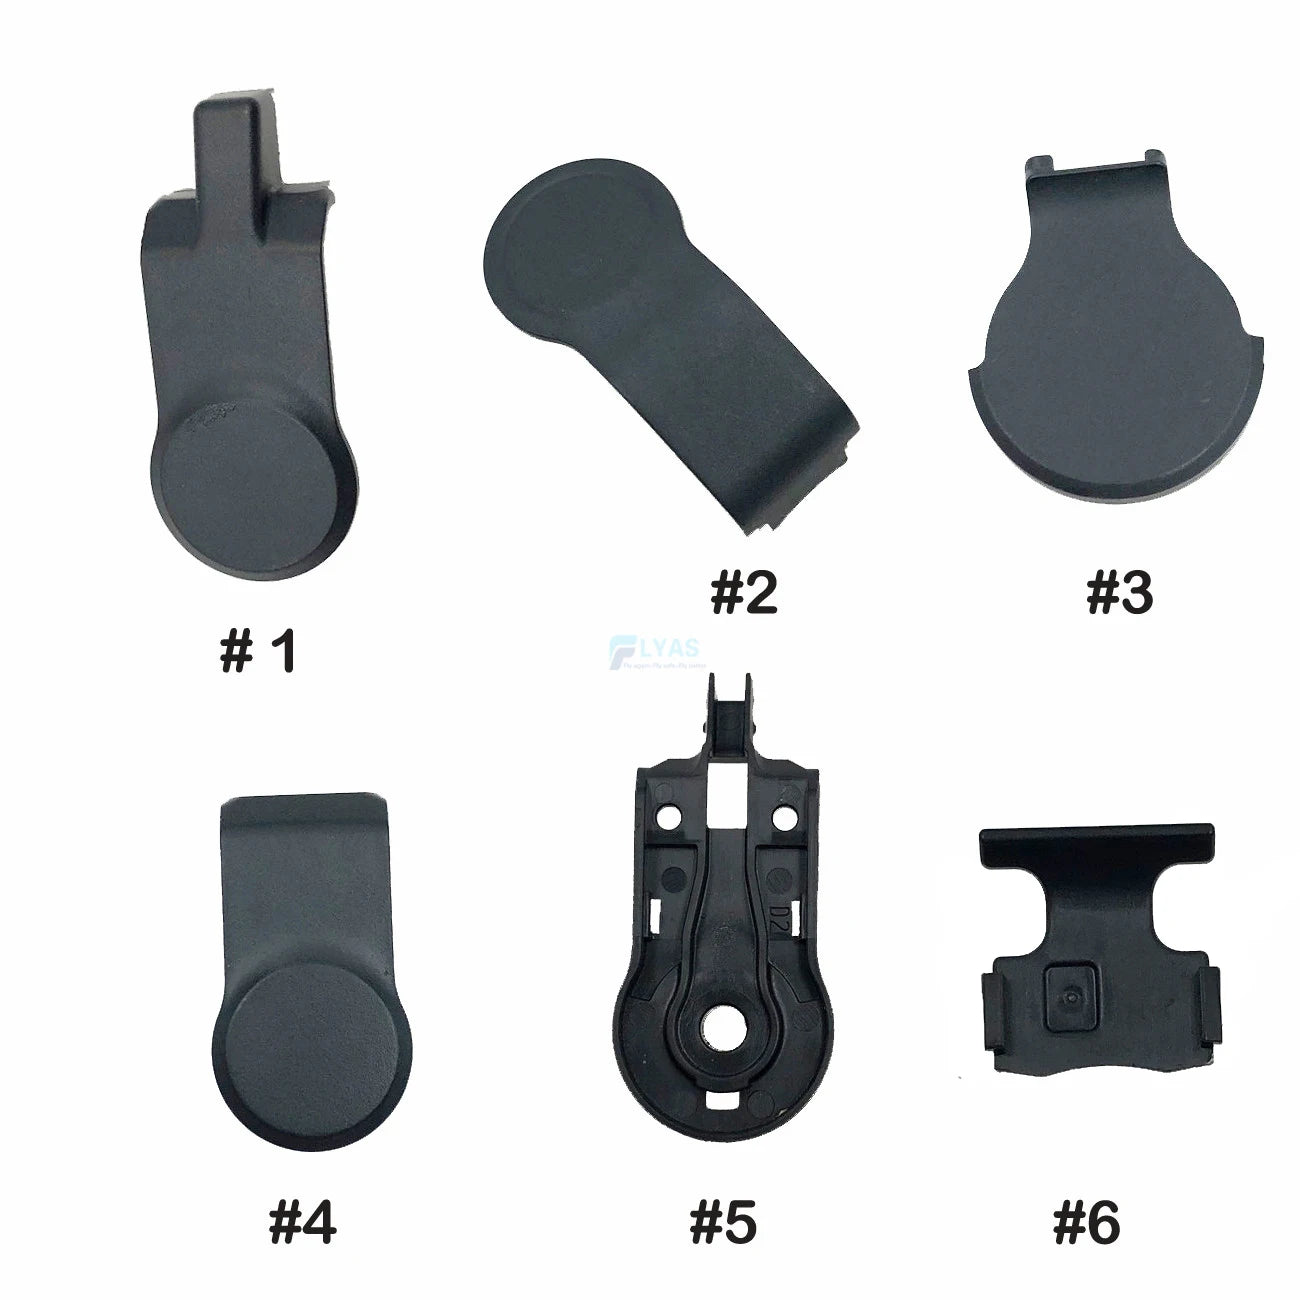 Gimbal Parts for DJI Mavic Air 2, 2, The option lens glass ring come without glass, only the ring .